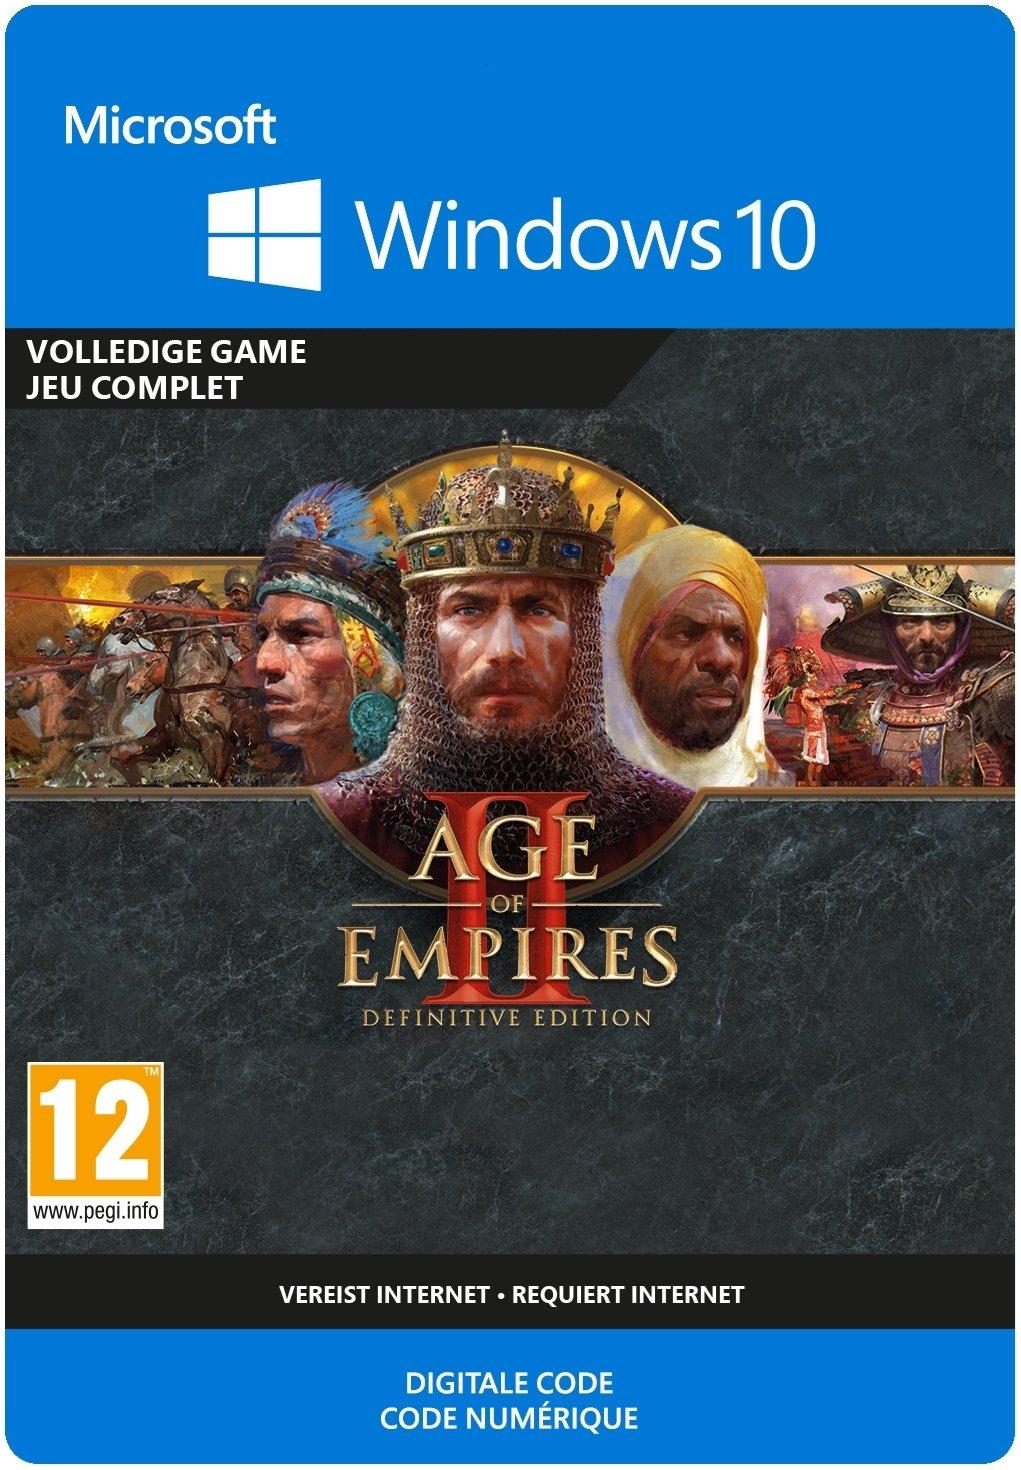 Age of Empires 2: Definitive Edition - Win10 - Game | 2WU-00011 (06d97748-18ad-3a49-8ed1-4a3243bb6861)